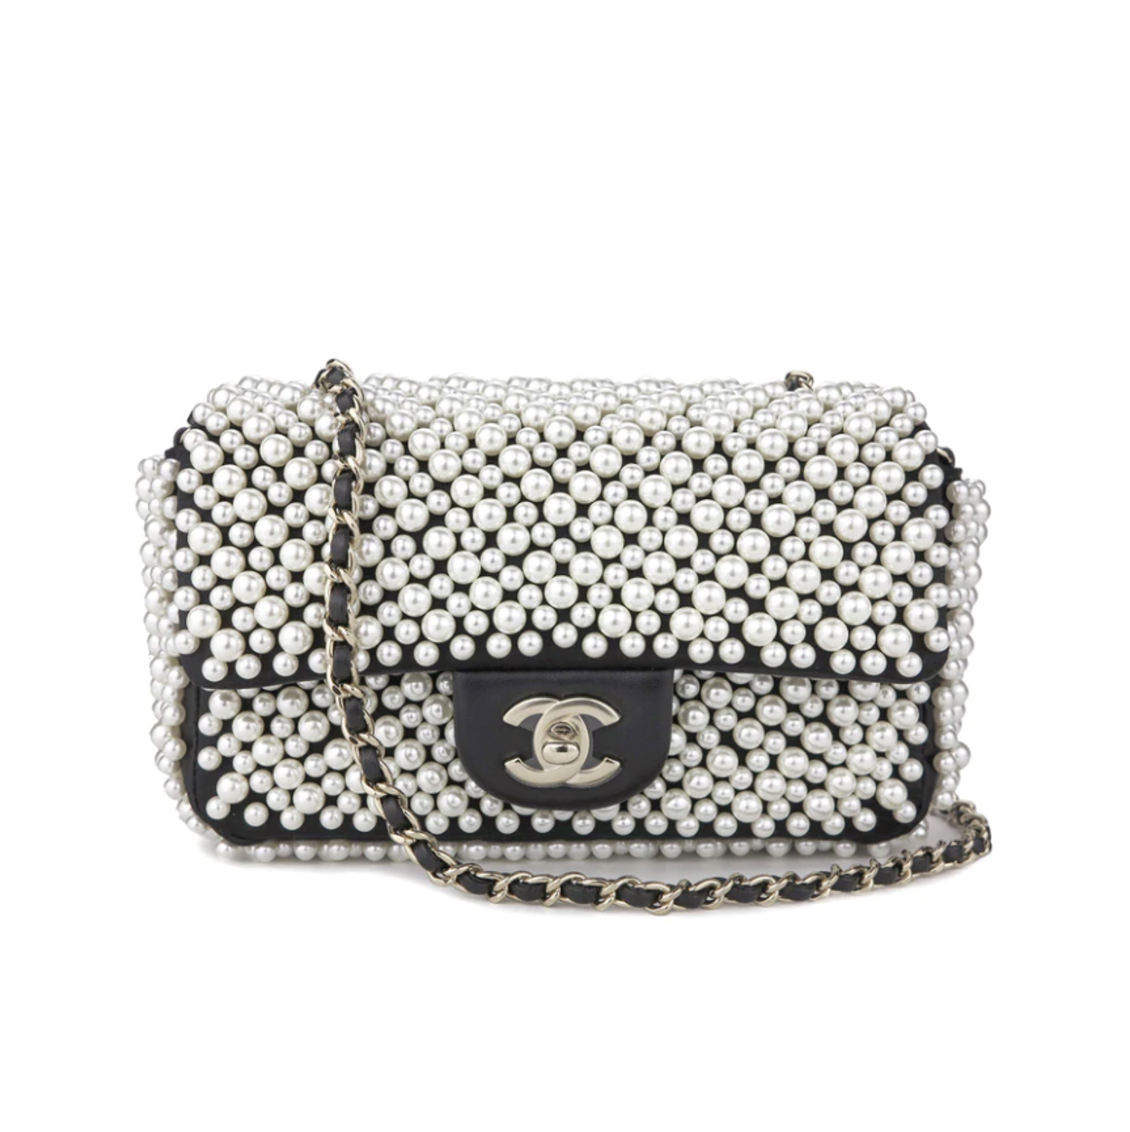 Chanel Mini Flap Bag in Black Satin Pearl with Gold Hardware — AMAIA